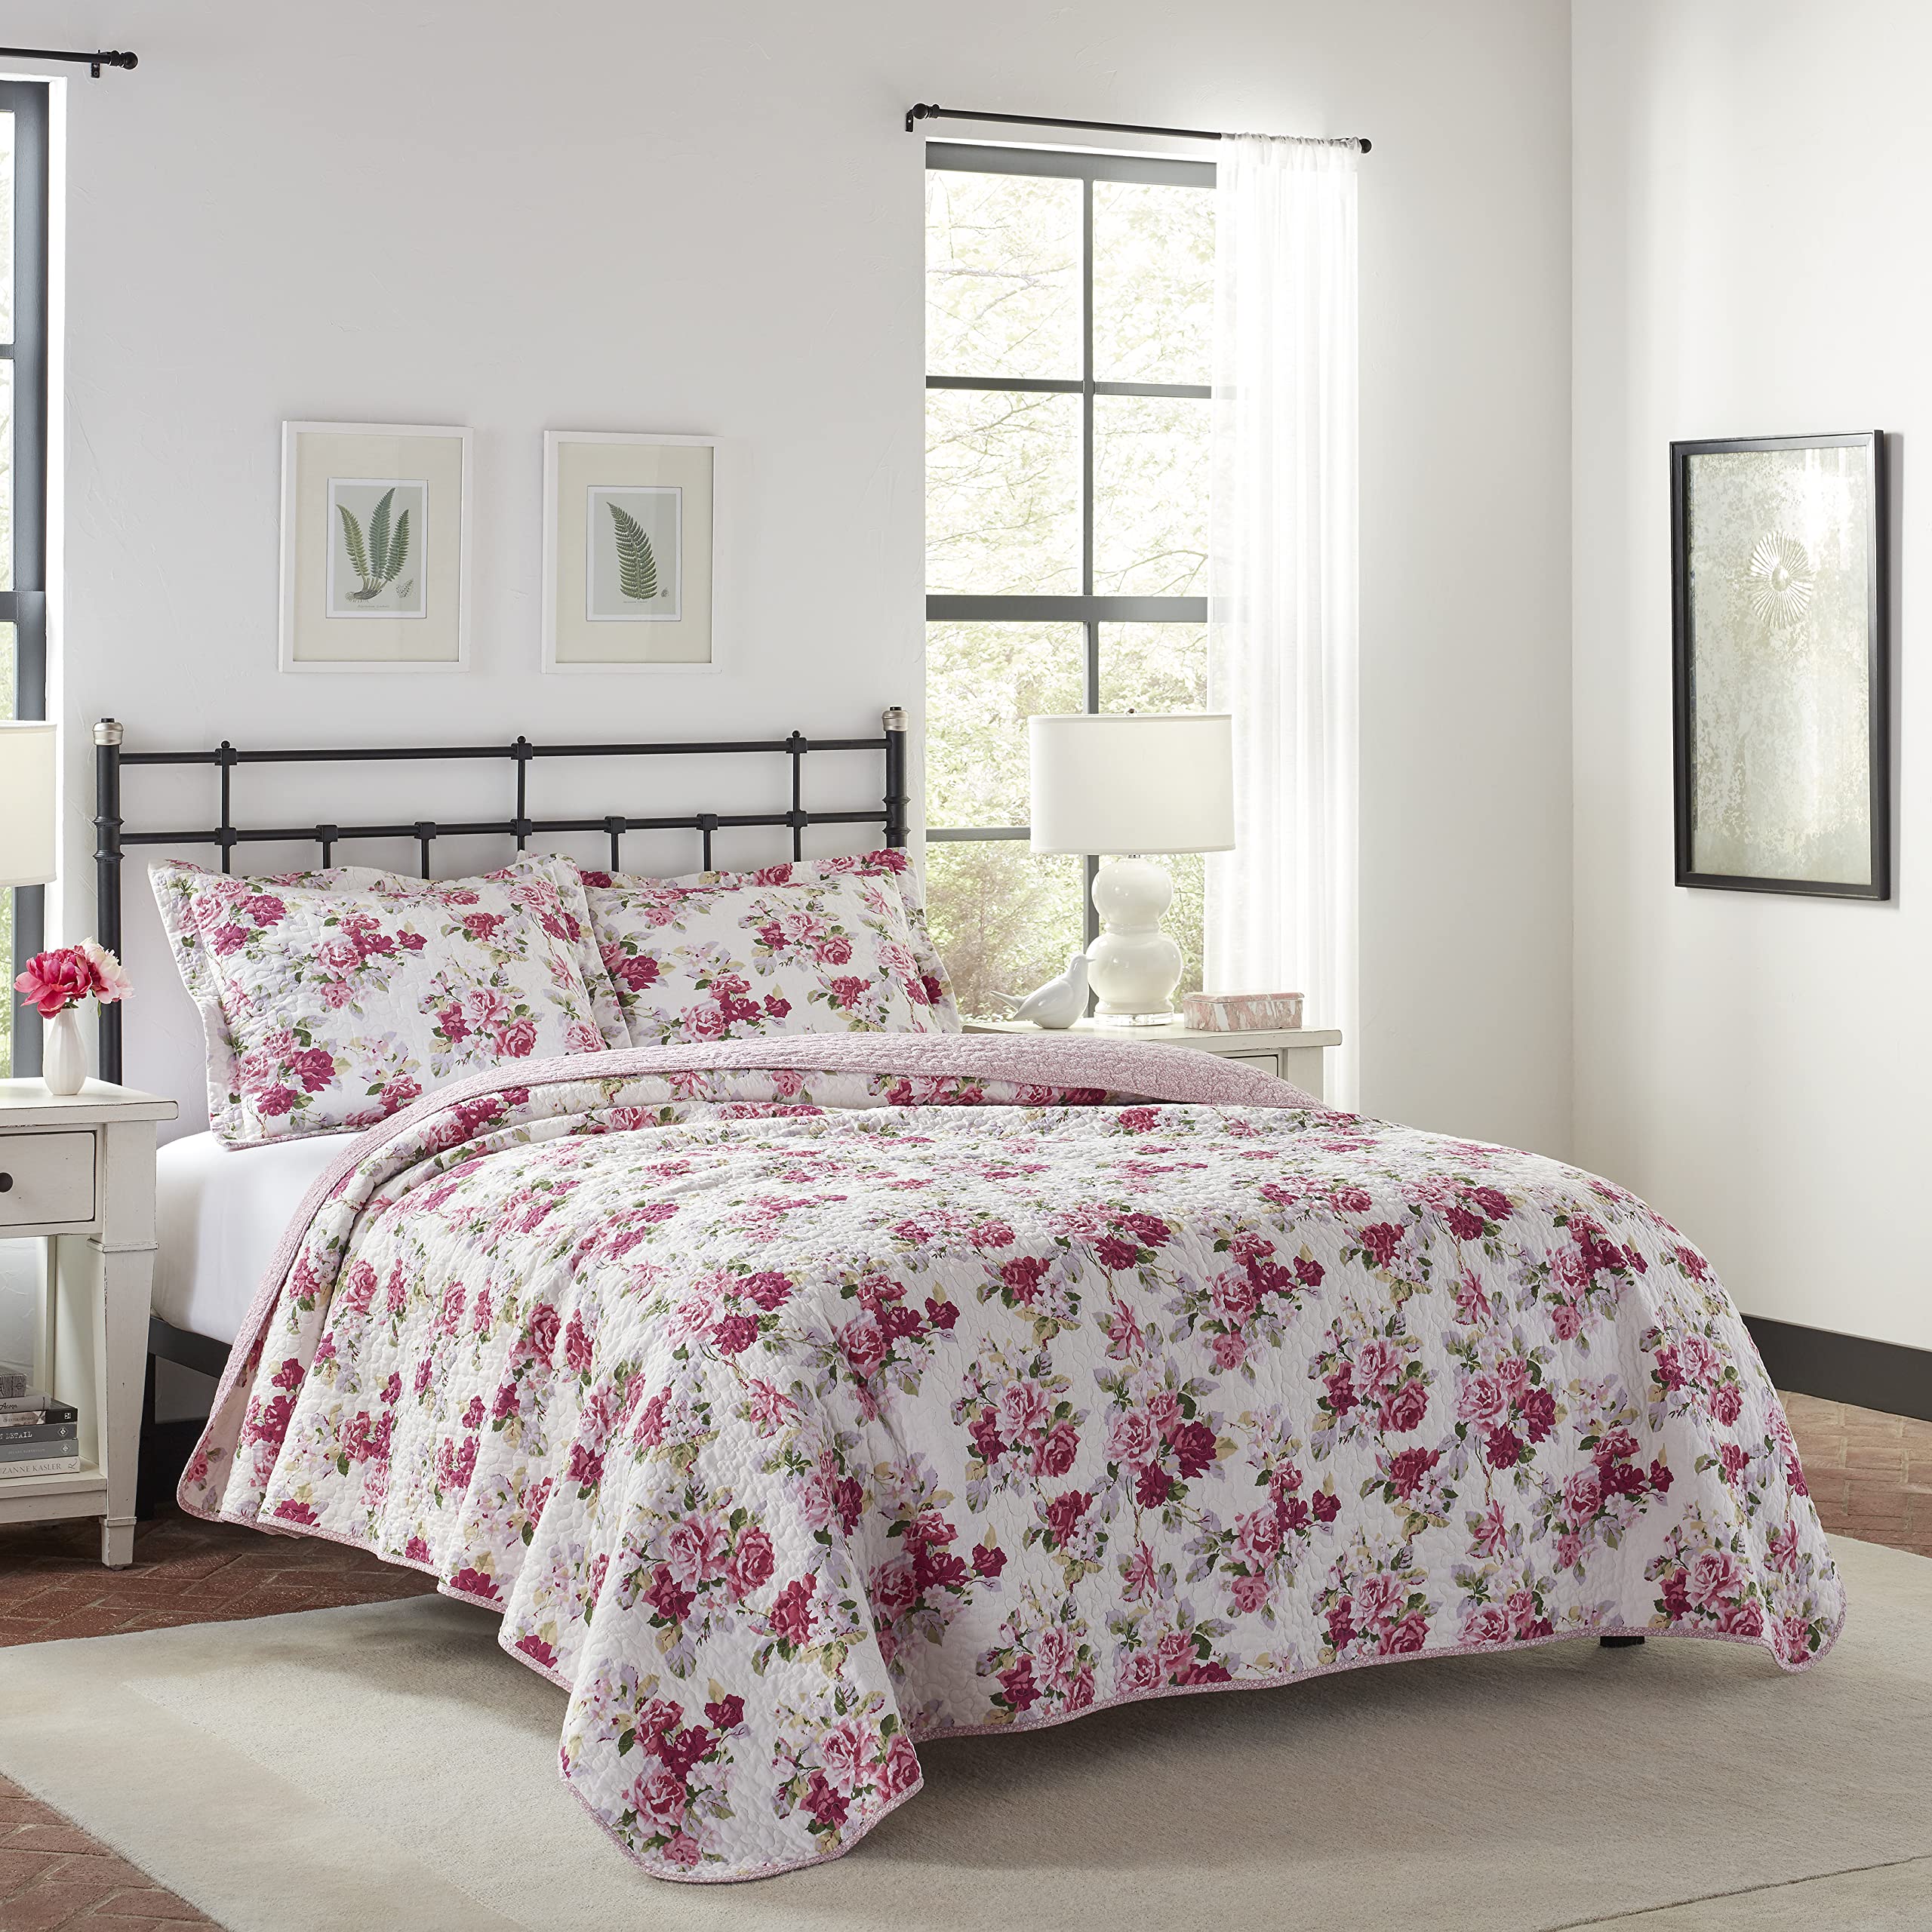 Book Cover Laura Ashley Home Lidia Collection Quilt Set-100% Cotton, Reversible, Lightweight & Breathable Bedding, Pre-Washed for Added Softness, Twin, Pink